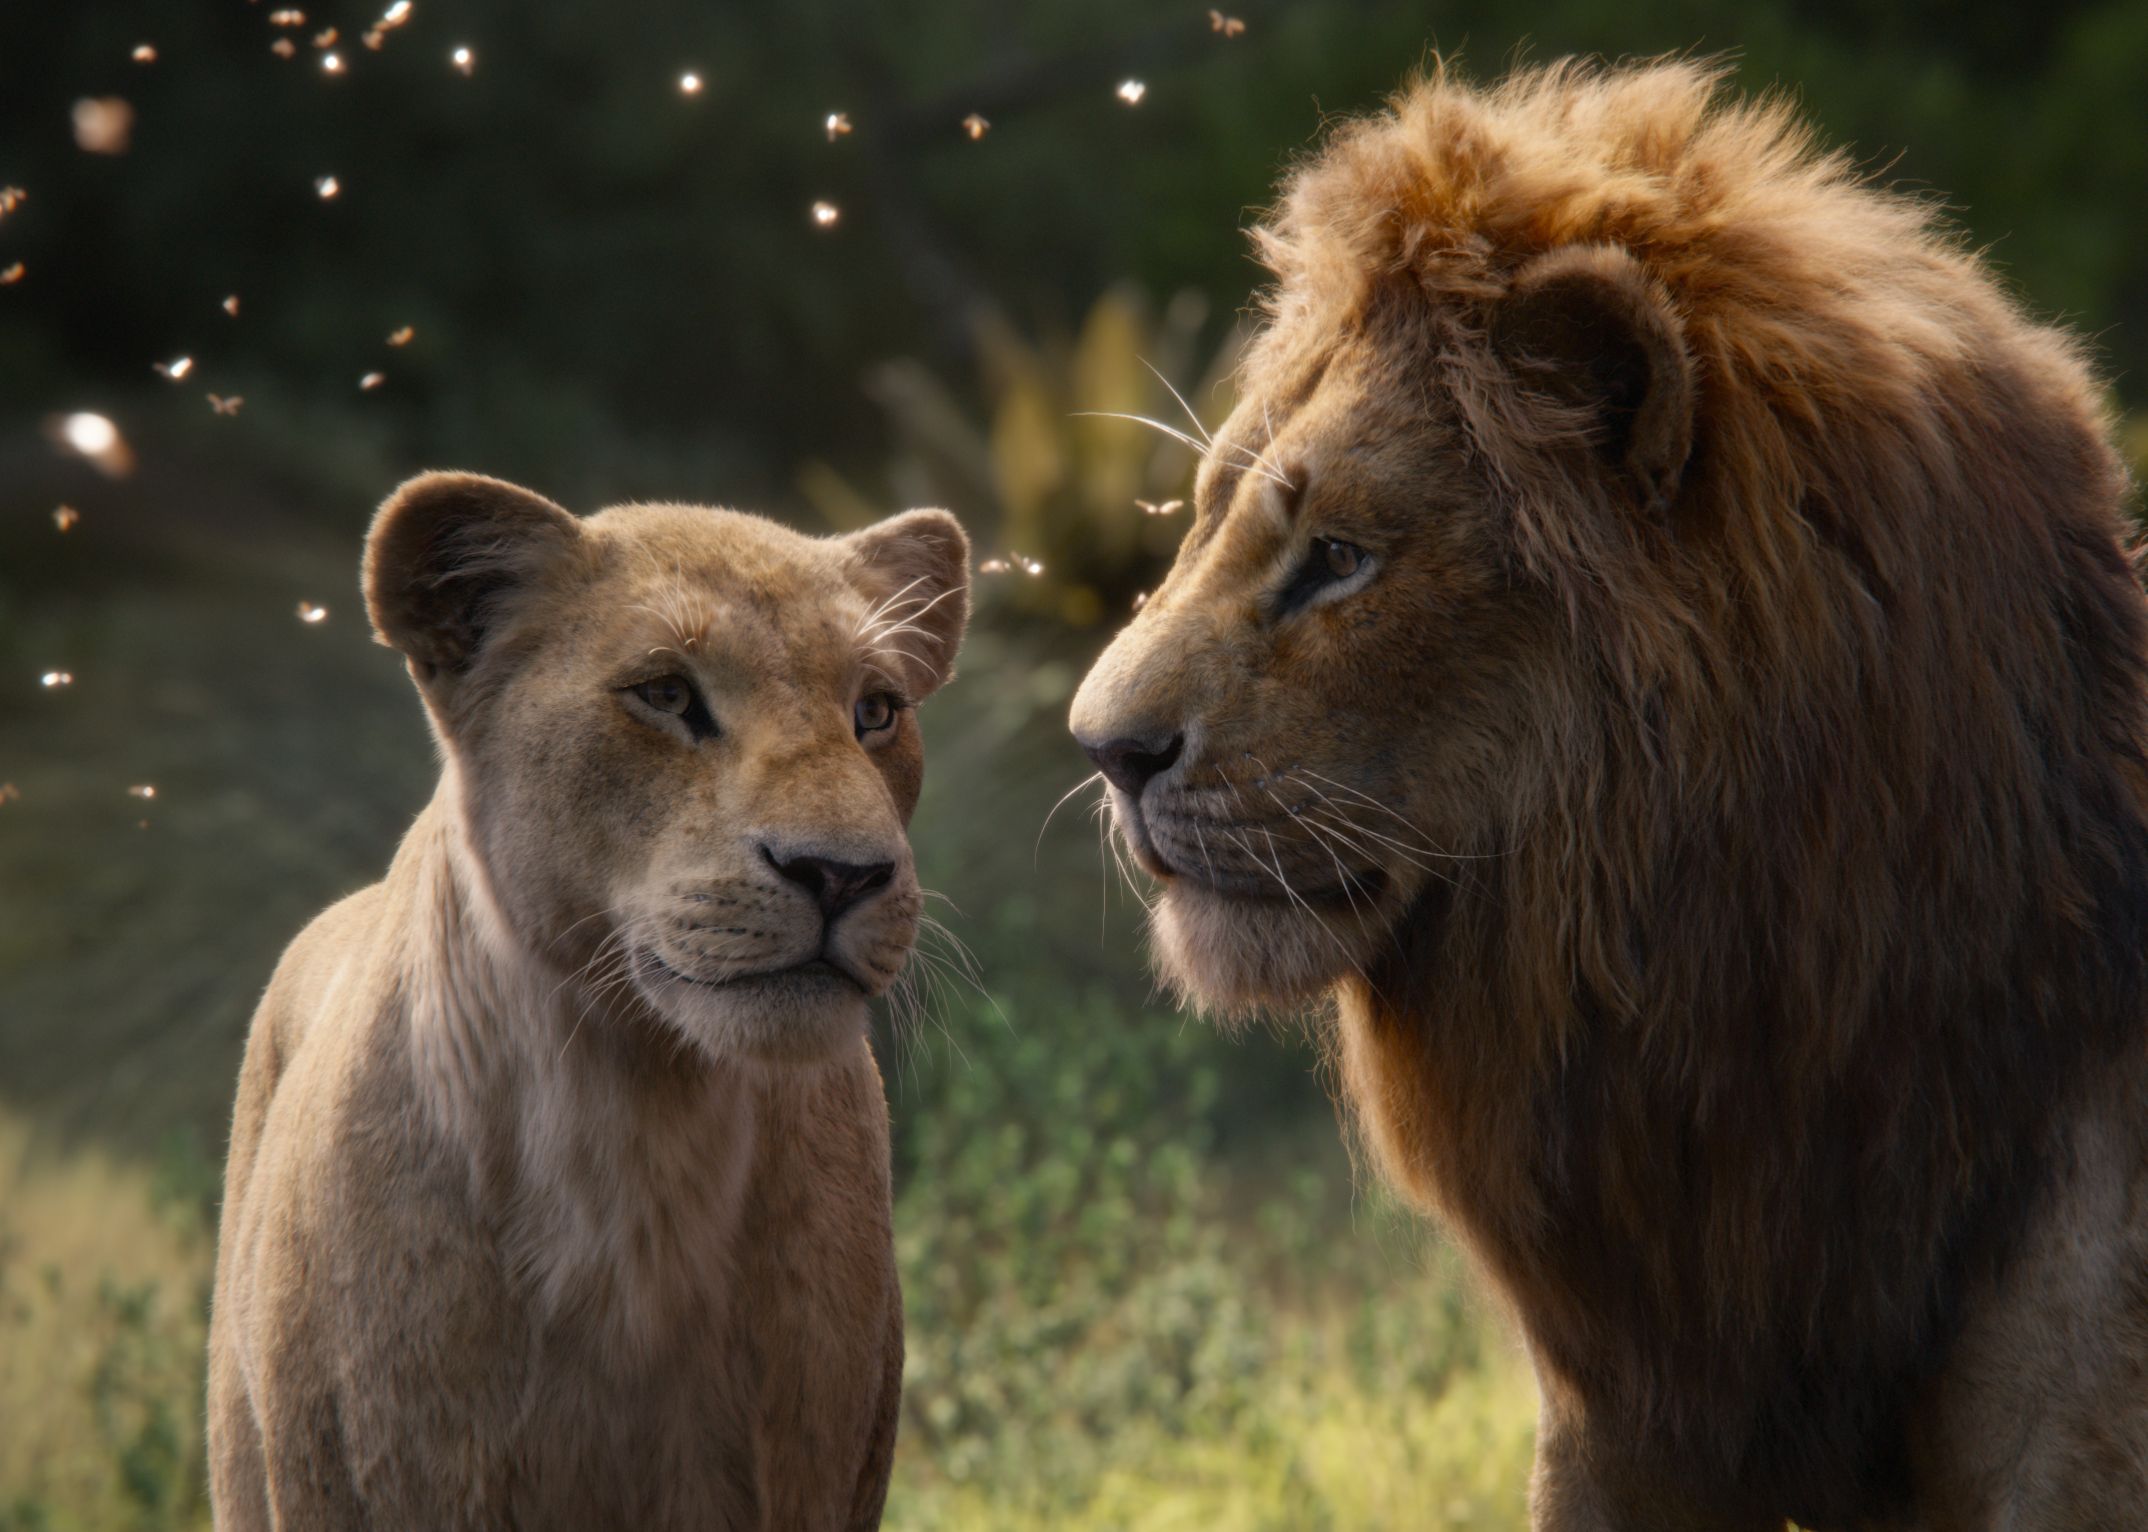 The lion king 2019 review - The Lion King